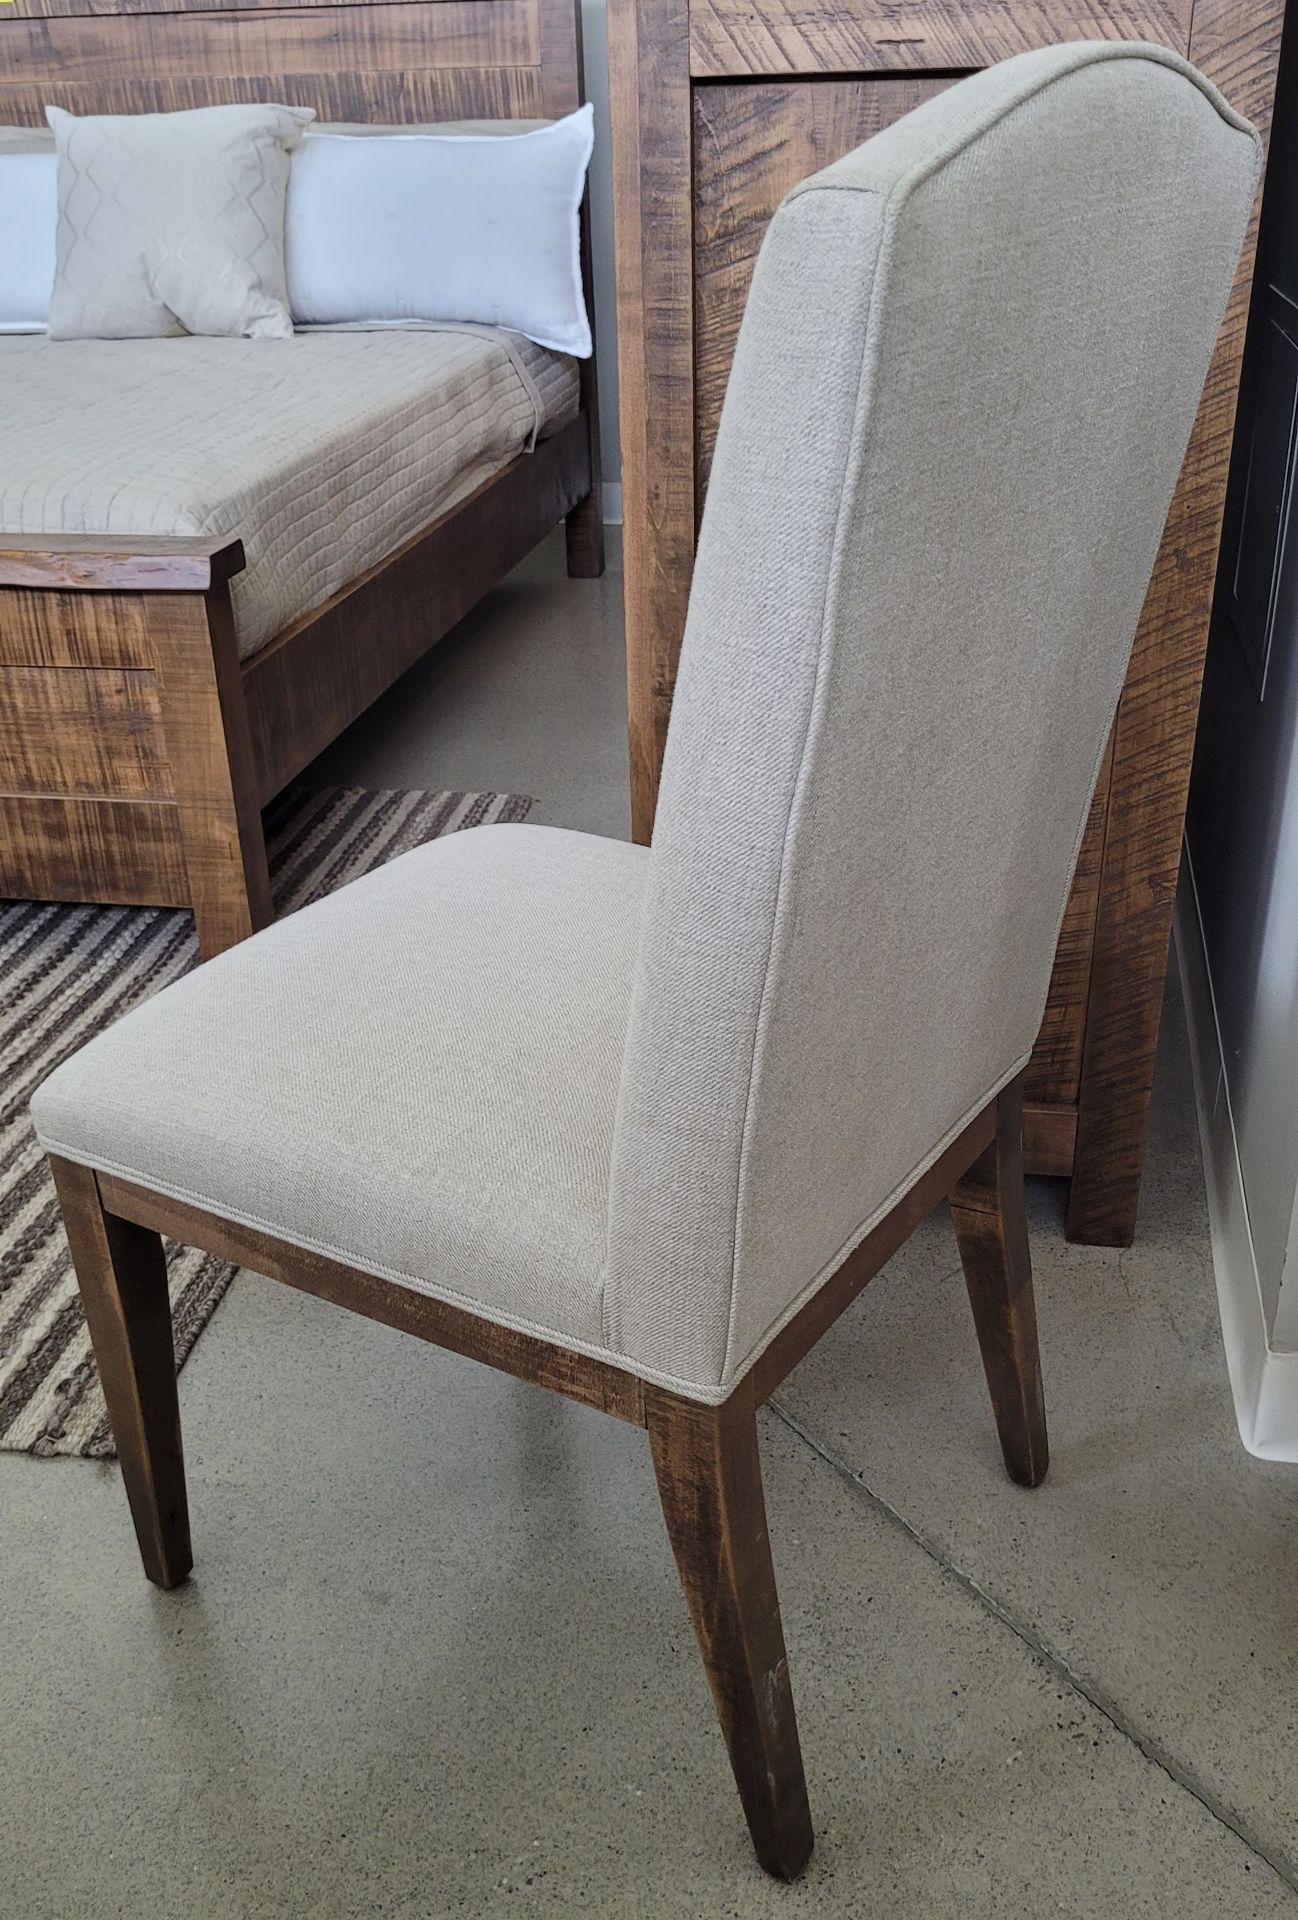 UPHOLSTERED SIDE CHAIR - Image 2 of 3